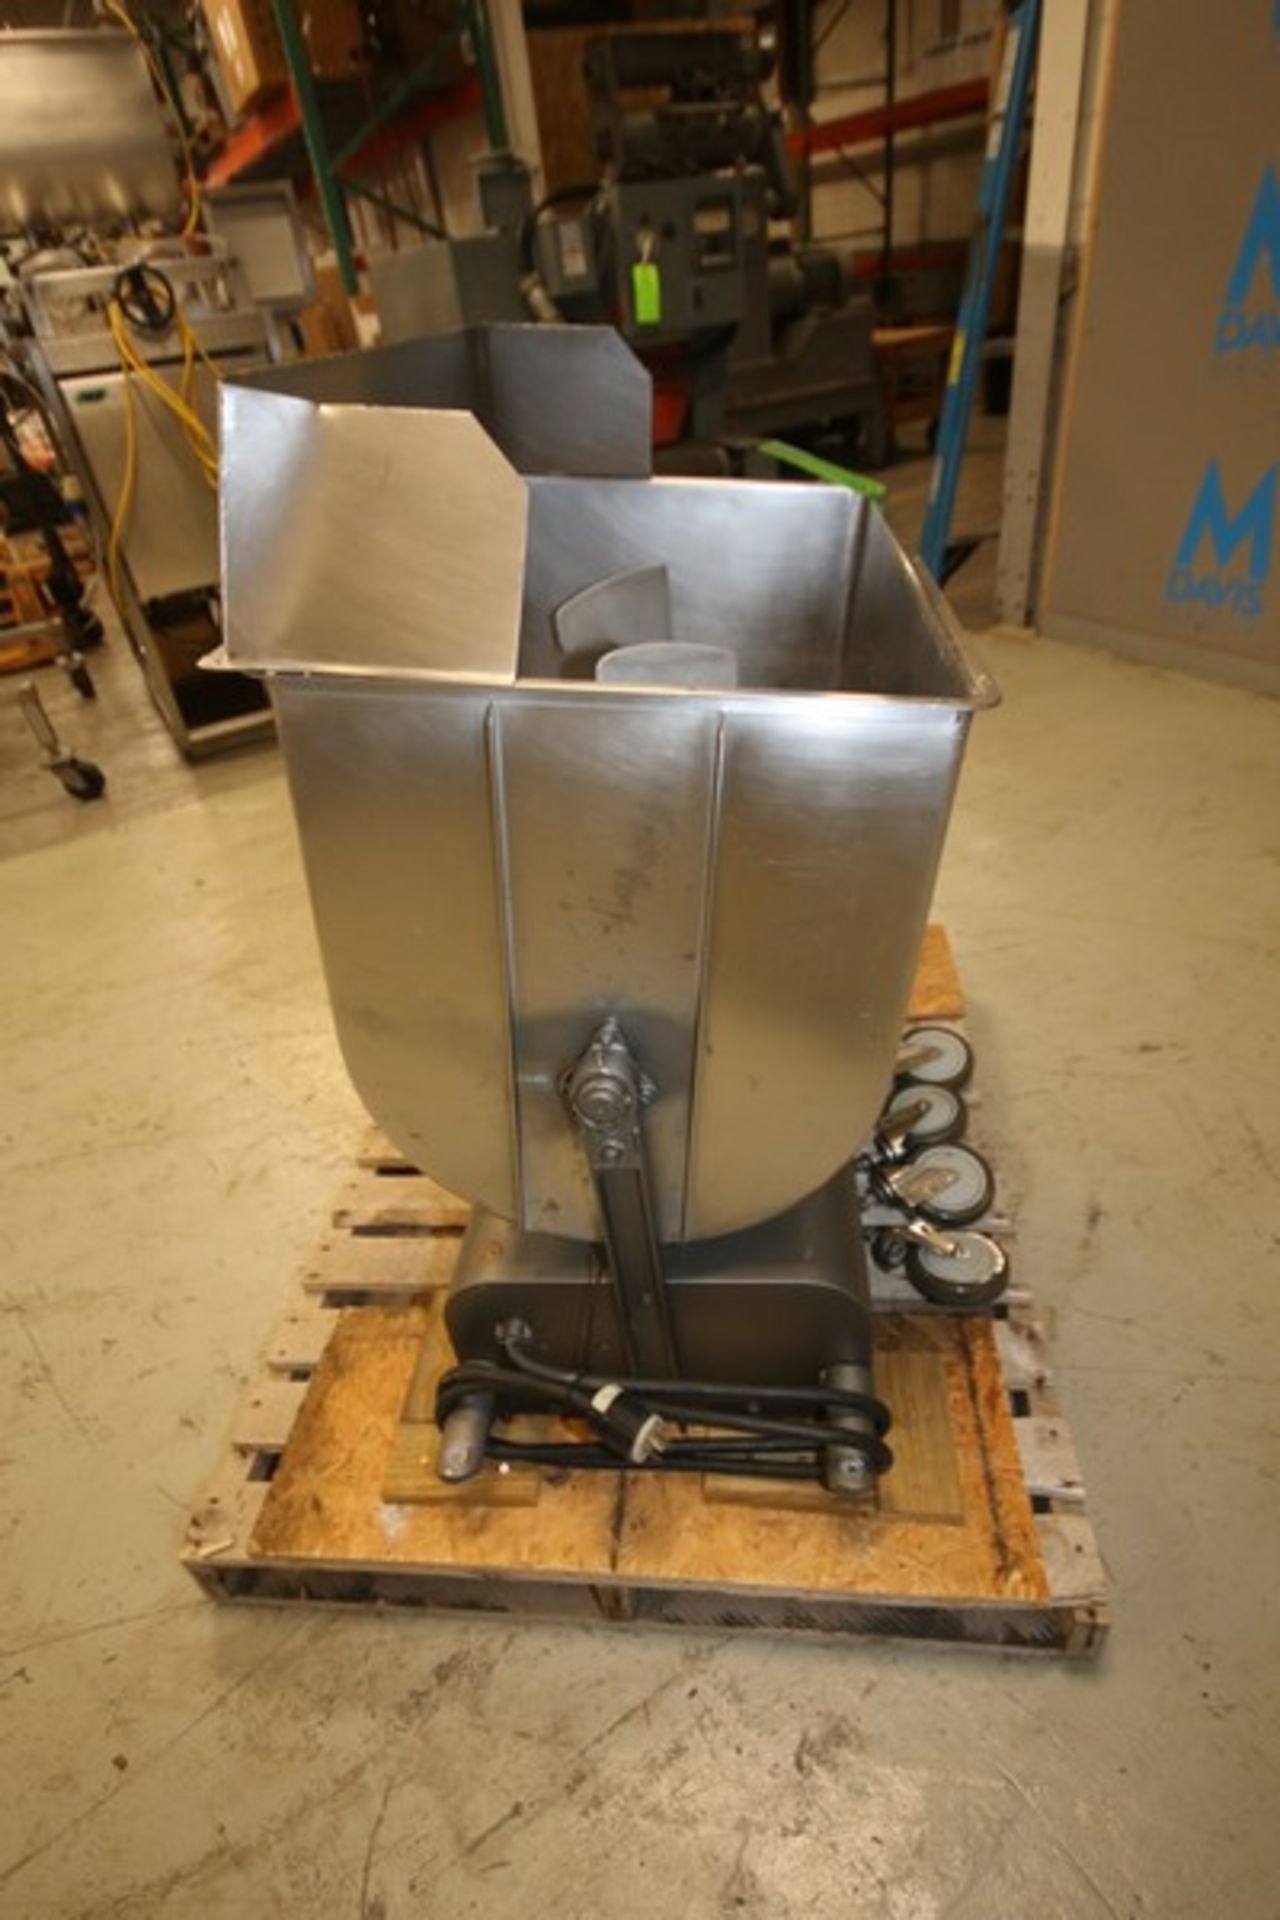 Butcher Boy 31" L x 20" W x 23" D Horizontal S/S Meat Mixer, Possibly Model 150, with Casters, ( - Image 6 of 7